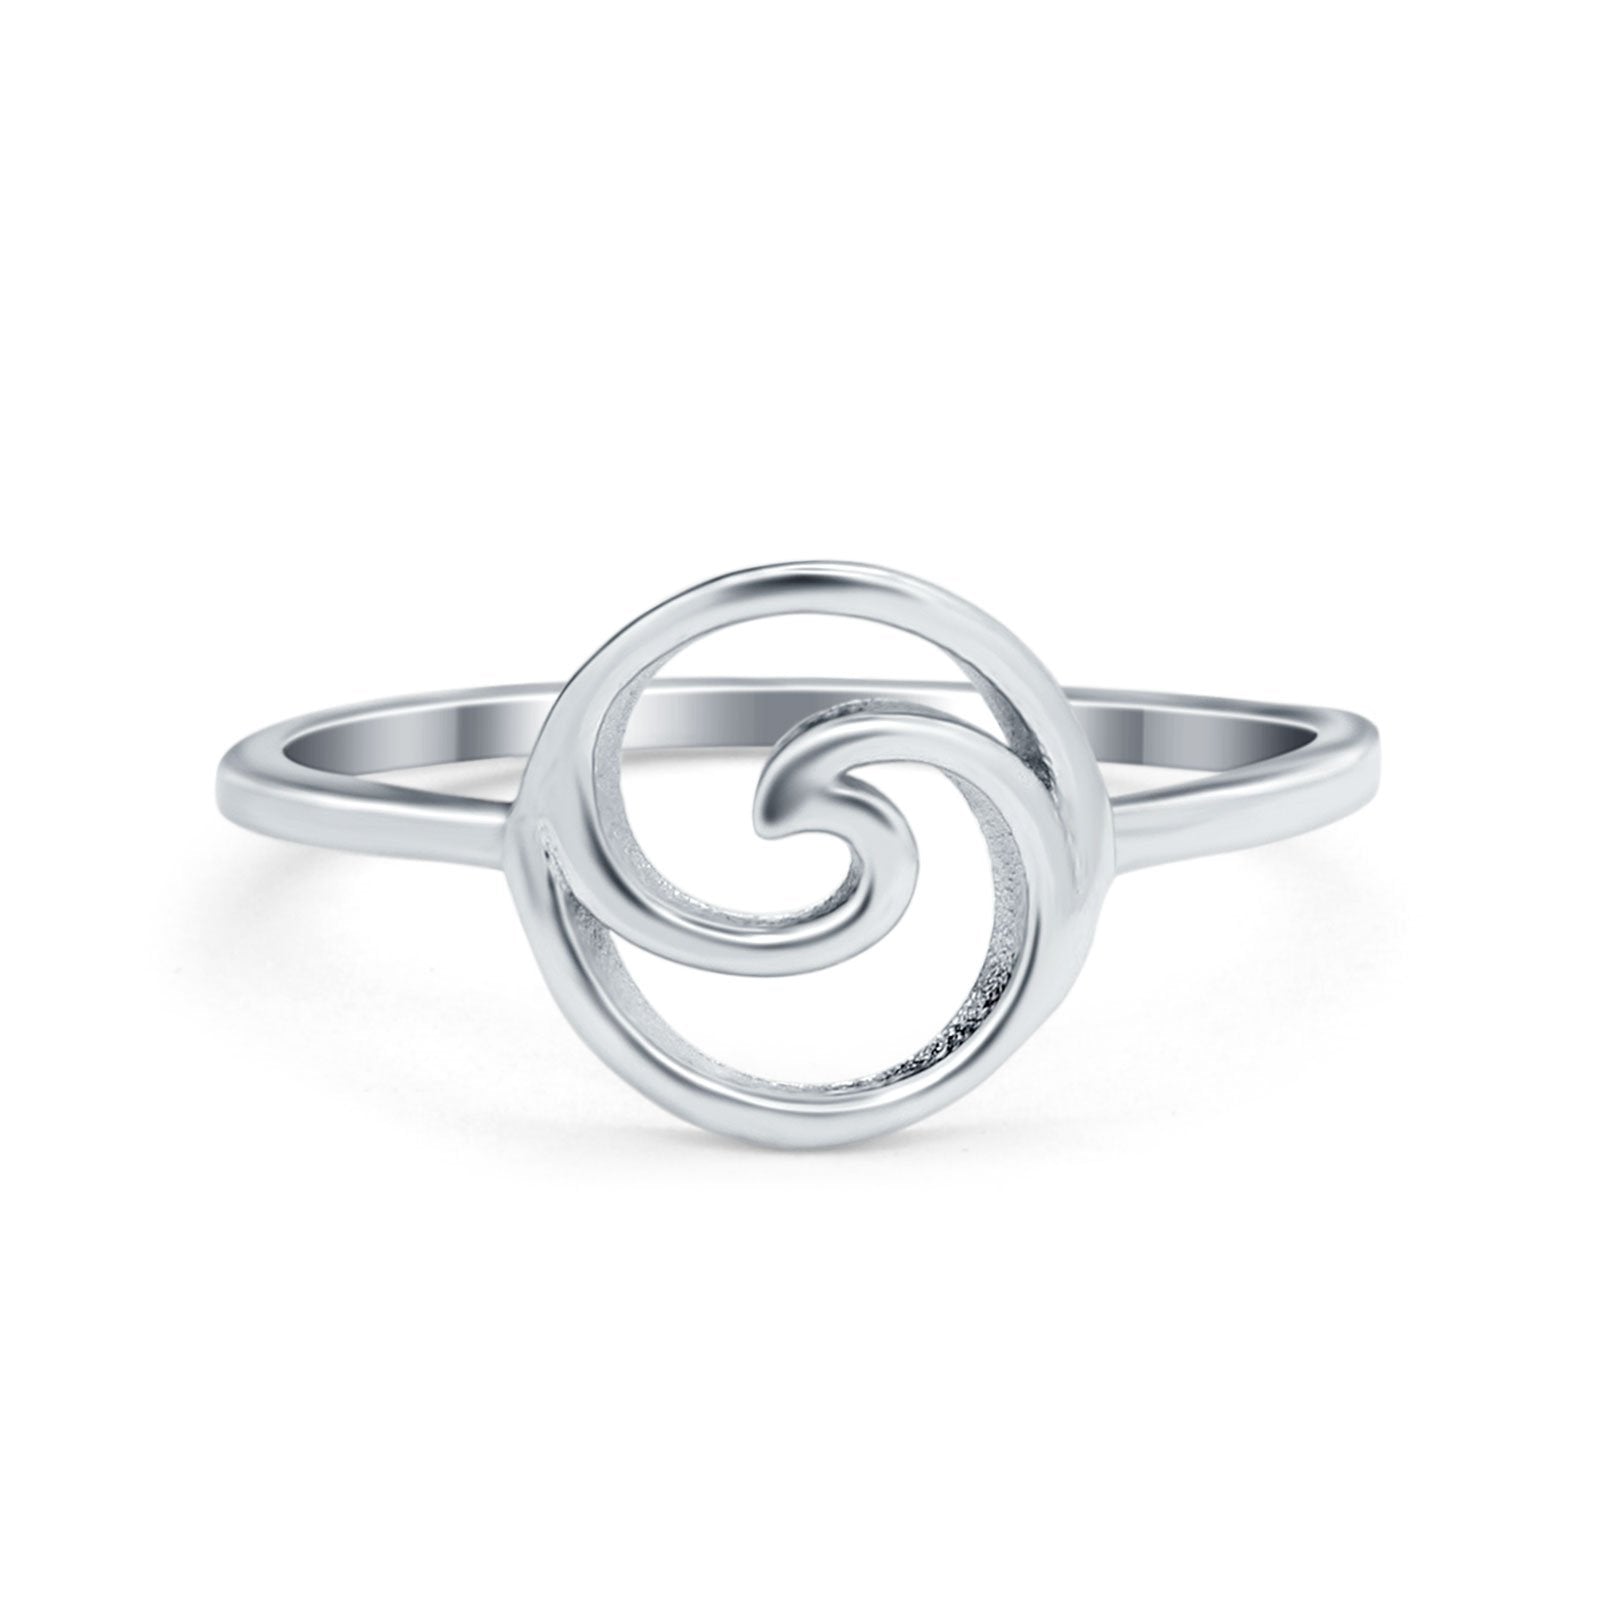 Round Wave Band Plain Ring Solid 925 Sterling Silver